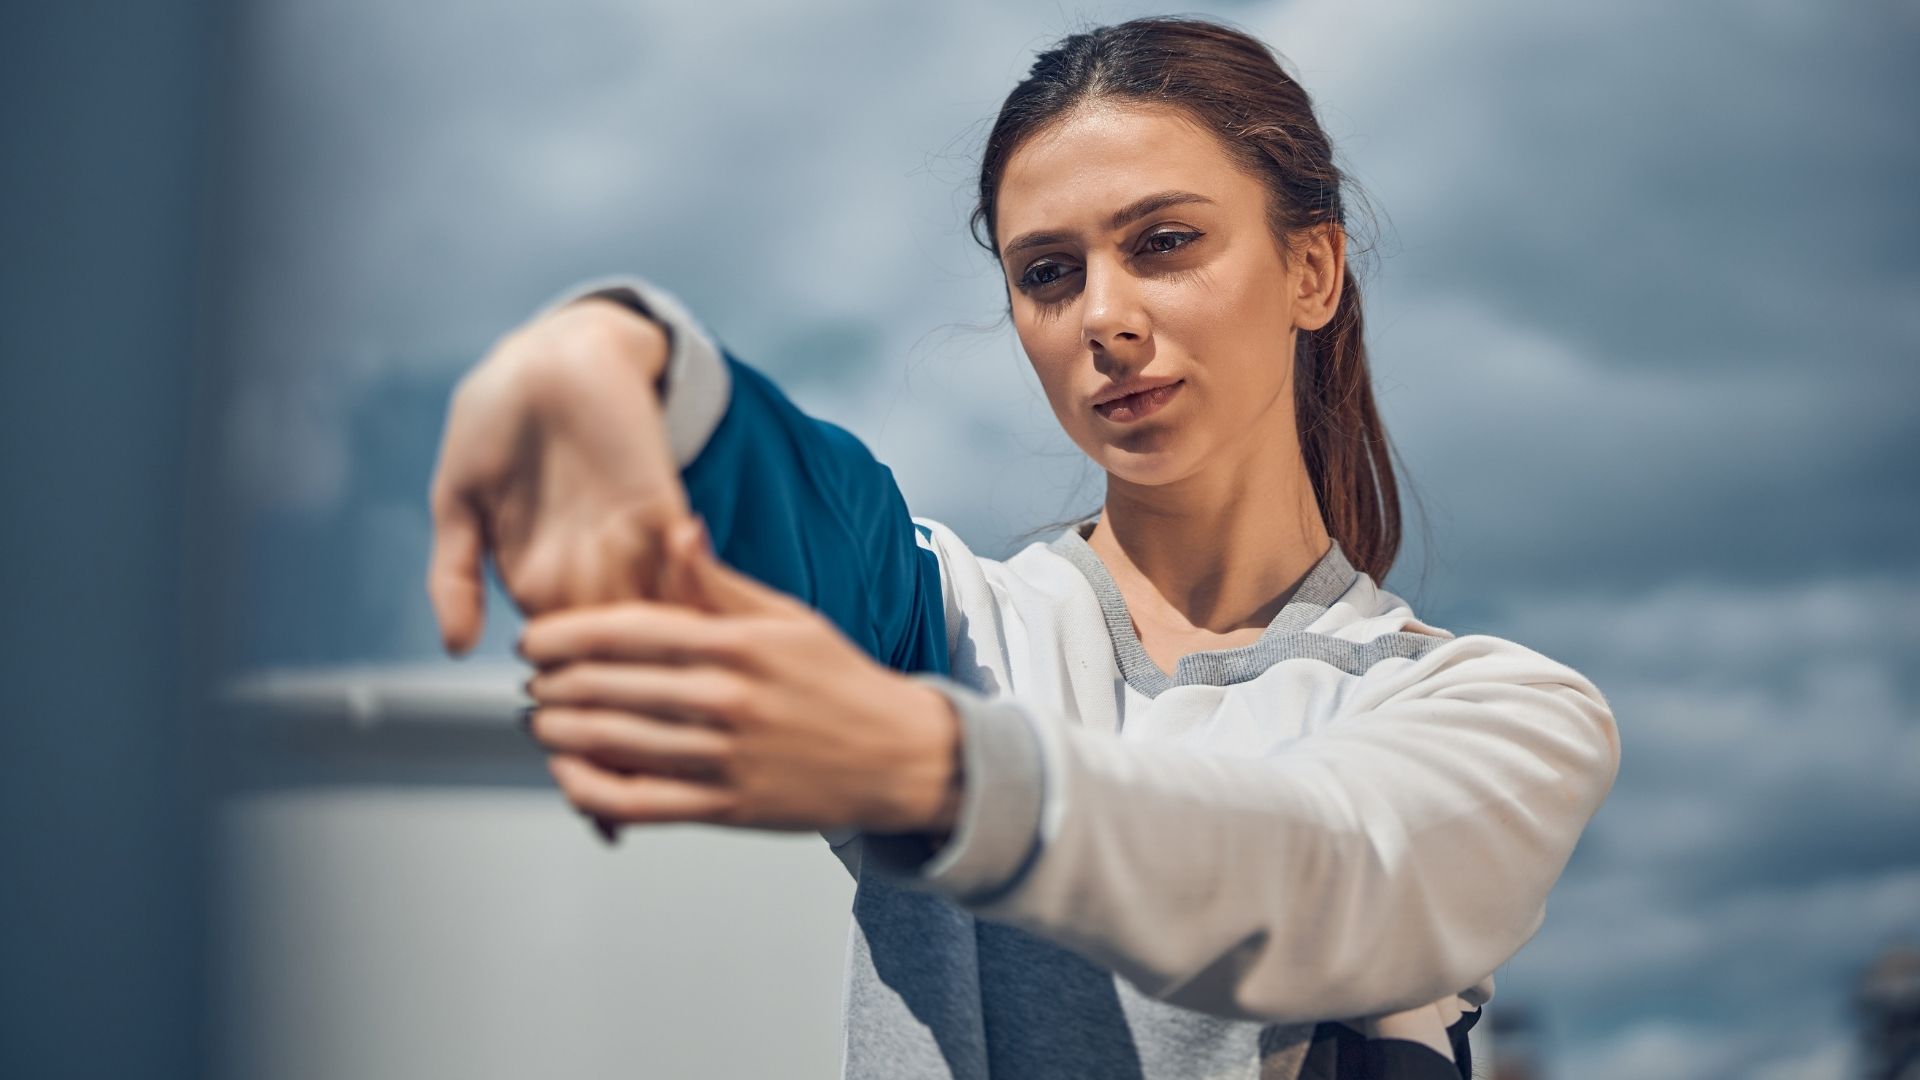 5 Wrist Stretches to Improve Mobility